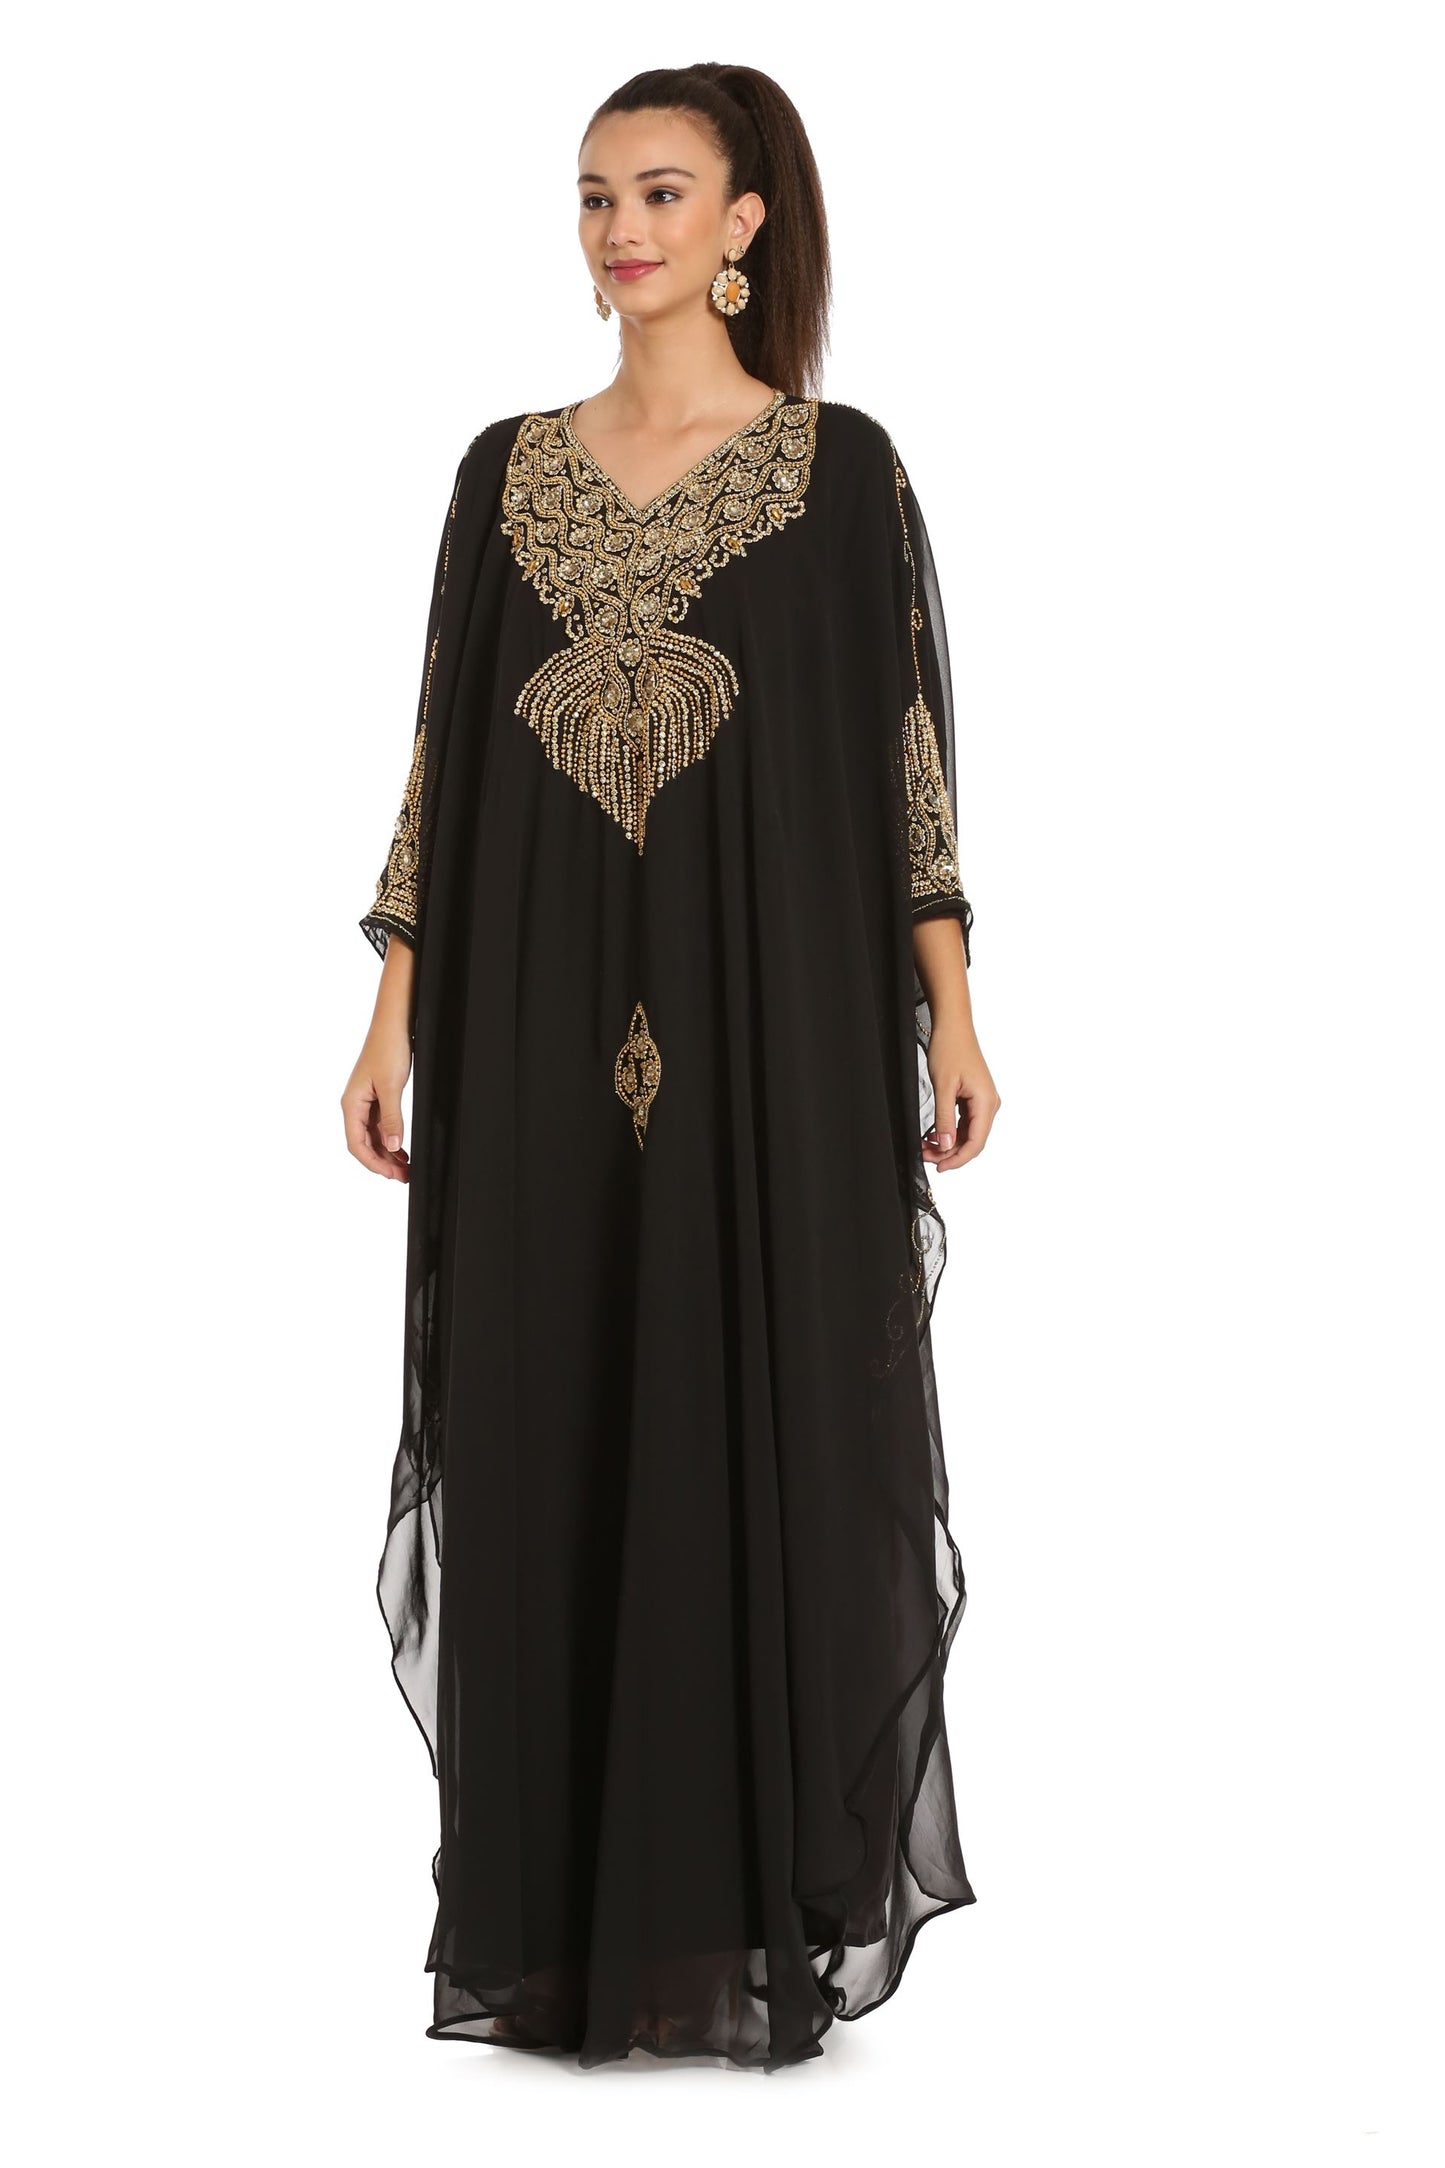 Handicraft Kaftan dress Embellished with Beads and Crystals - Maxim Creation